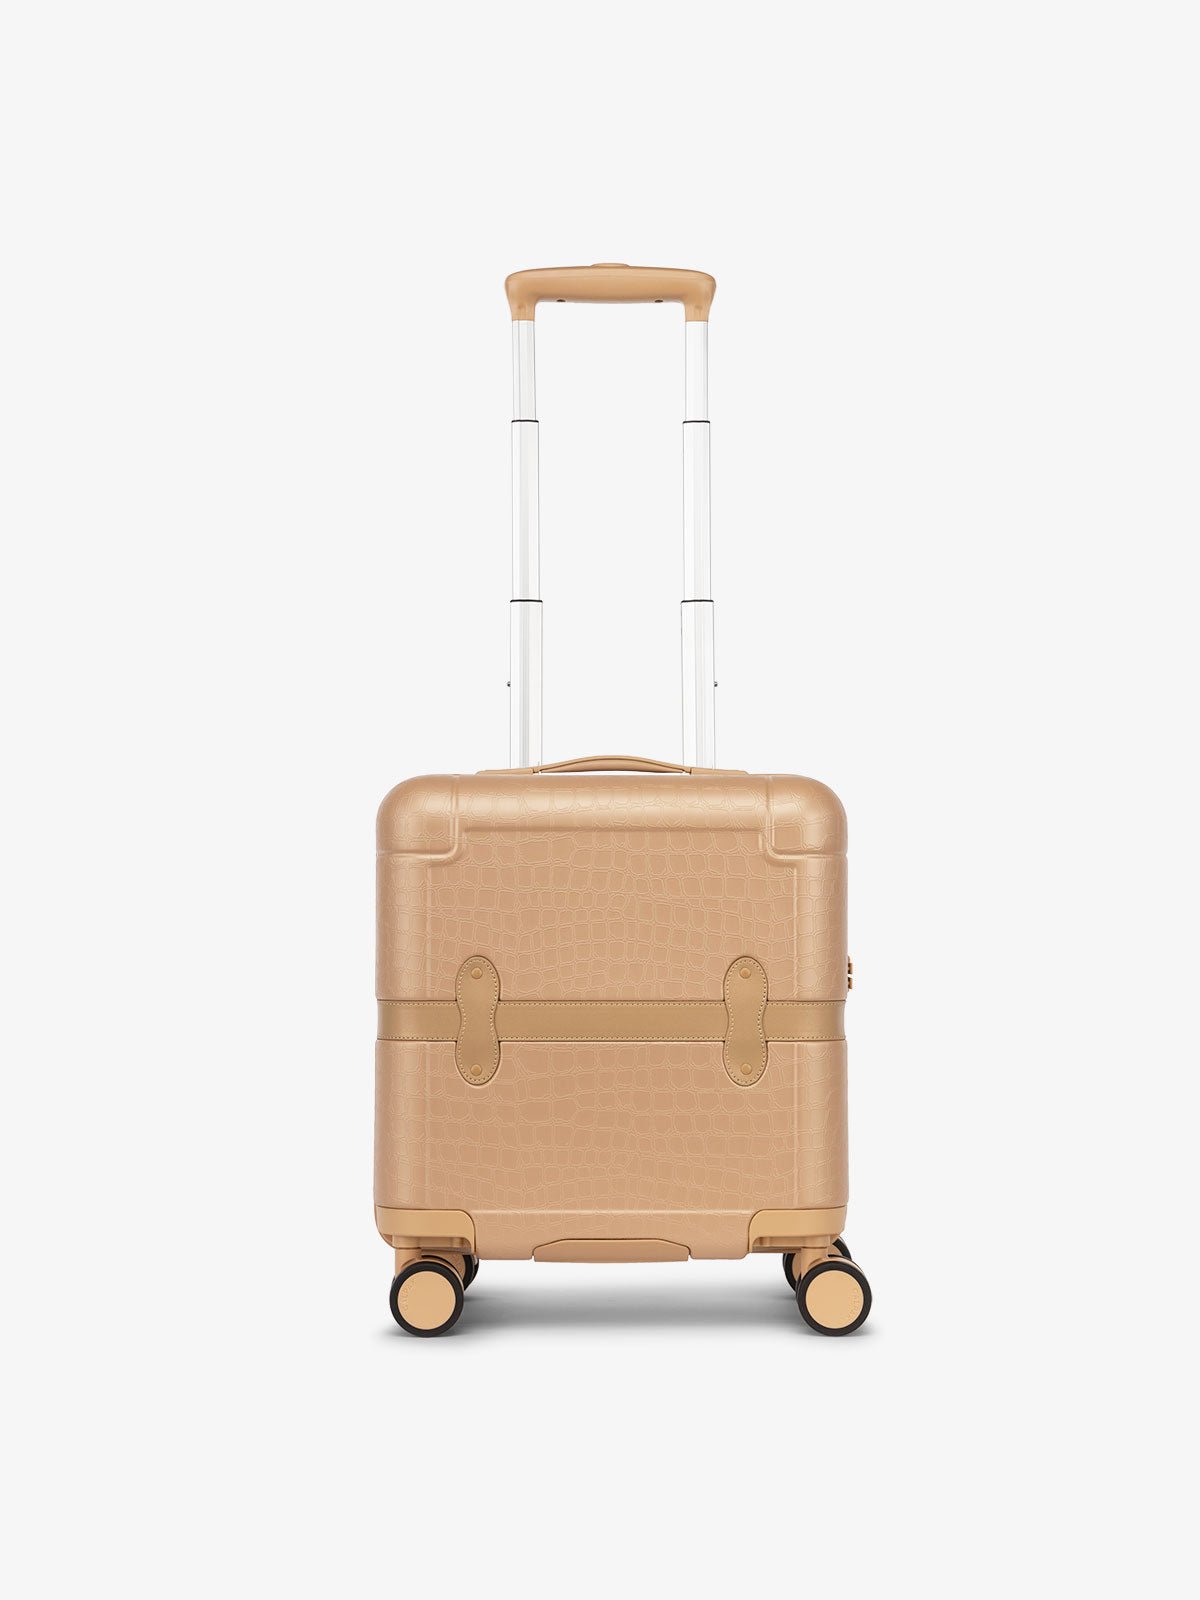 CALPAK TRNK mini carry on luggage with faux-crocodile design in almond